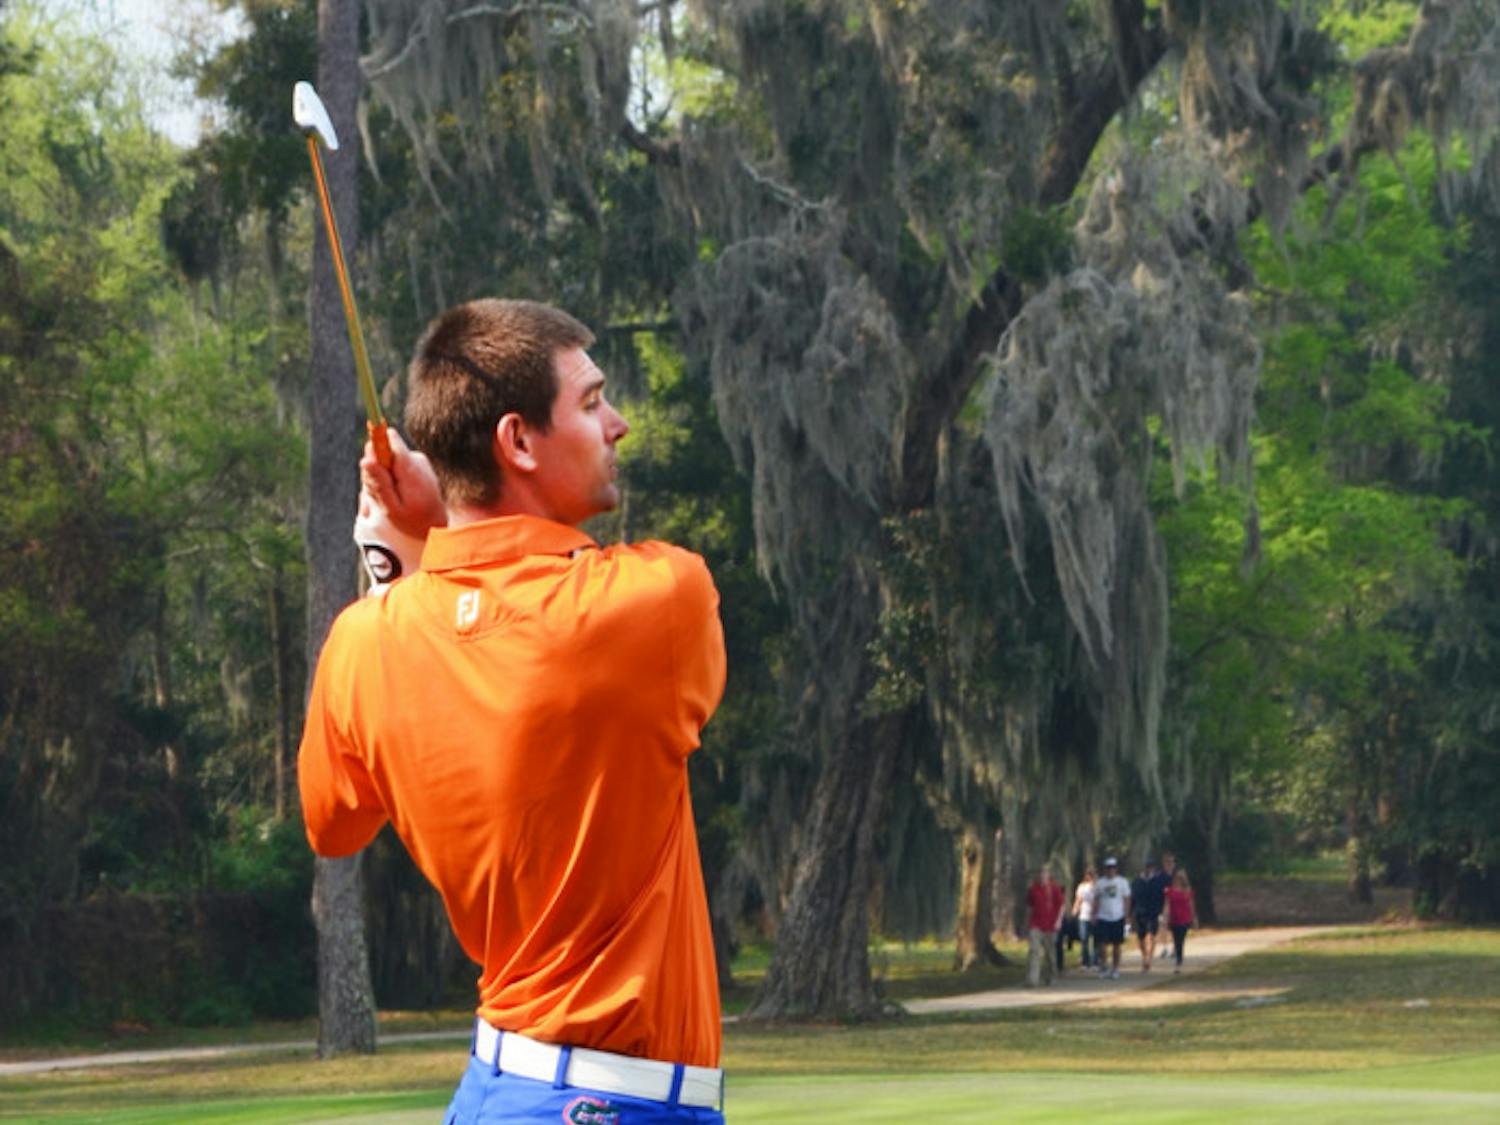 Senior T.J. Vogel eyes his shot during the SunTrust Gator Invitational at Mark Bostick Golf Course on Sunday. Vogel is back with the Gators after competing in The Masters.